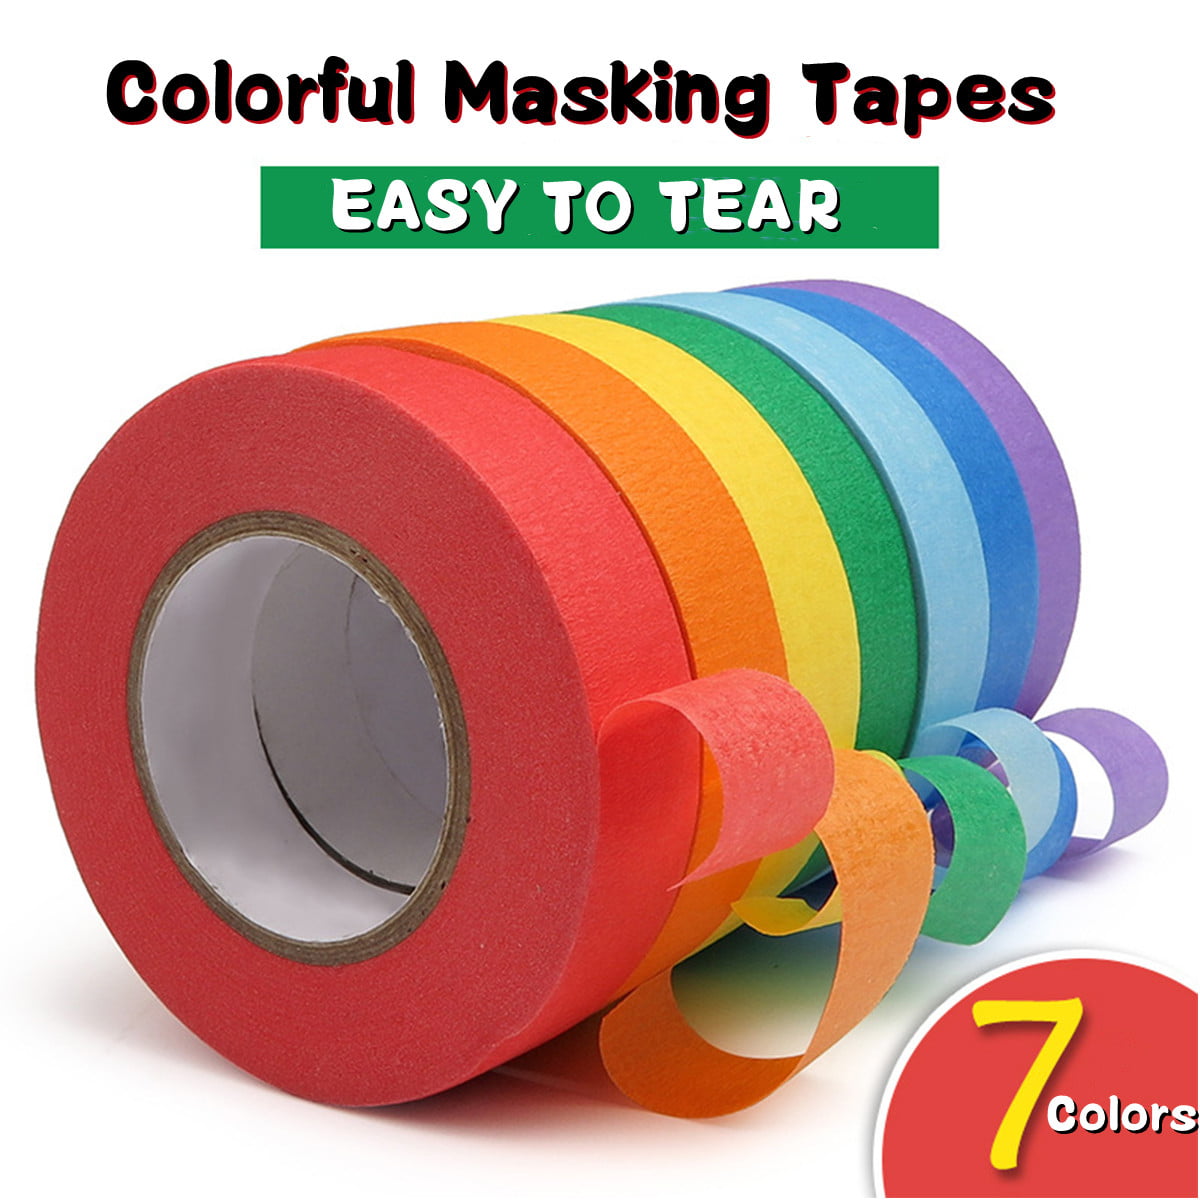 Colored Masking Tapes, 7PCS Arts Rainbow Labelling Masking Tape Fun  Supplies Kit for Kids and Adults, Painters Tapes for Crafts, School  Projects